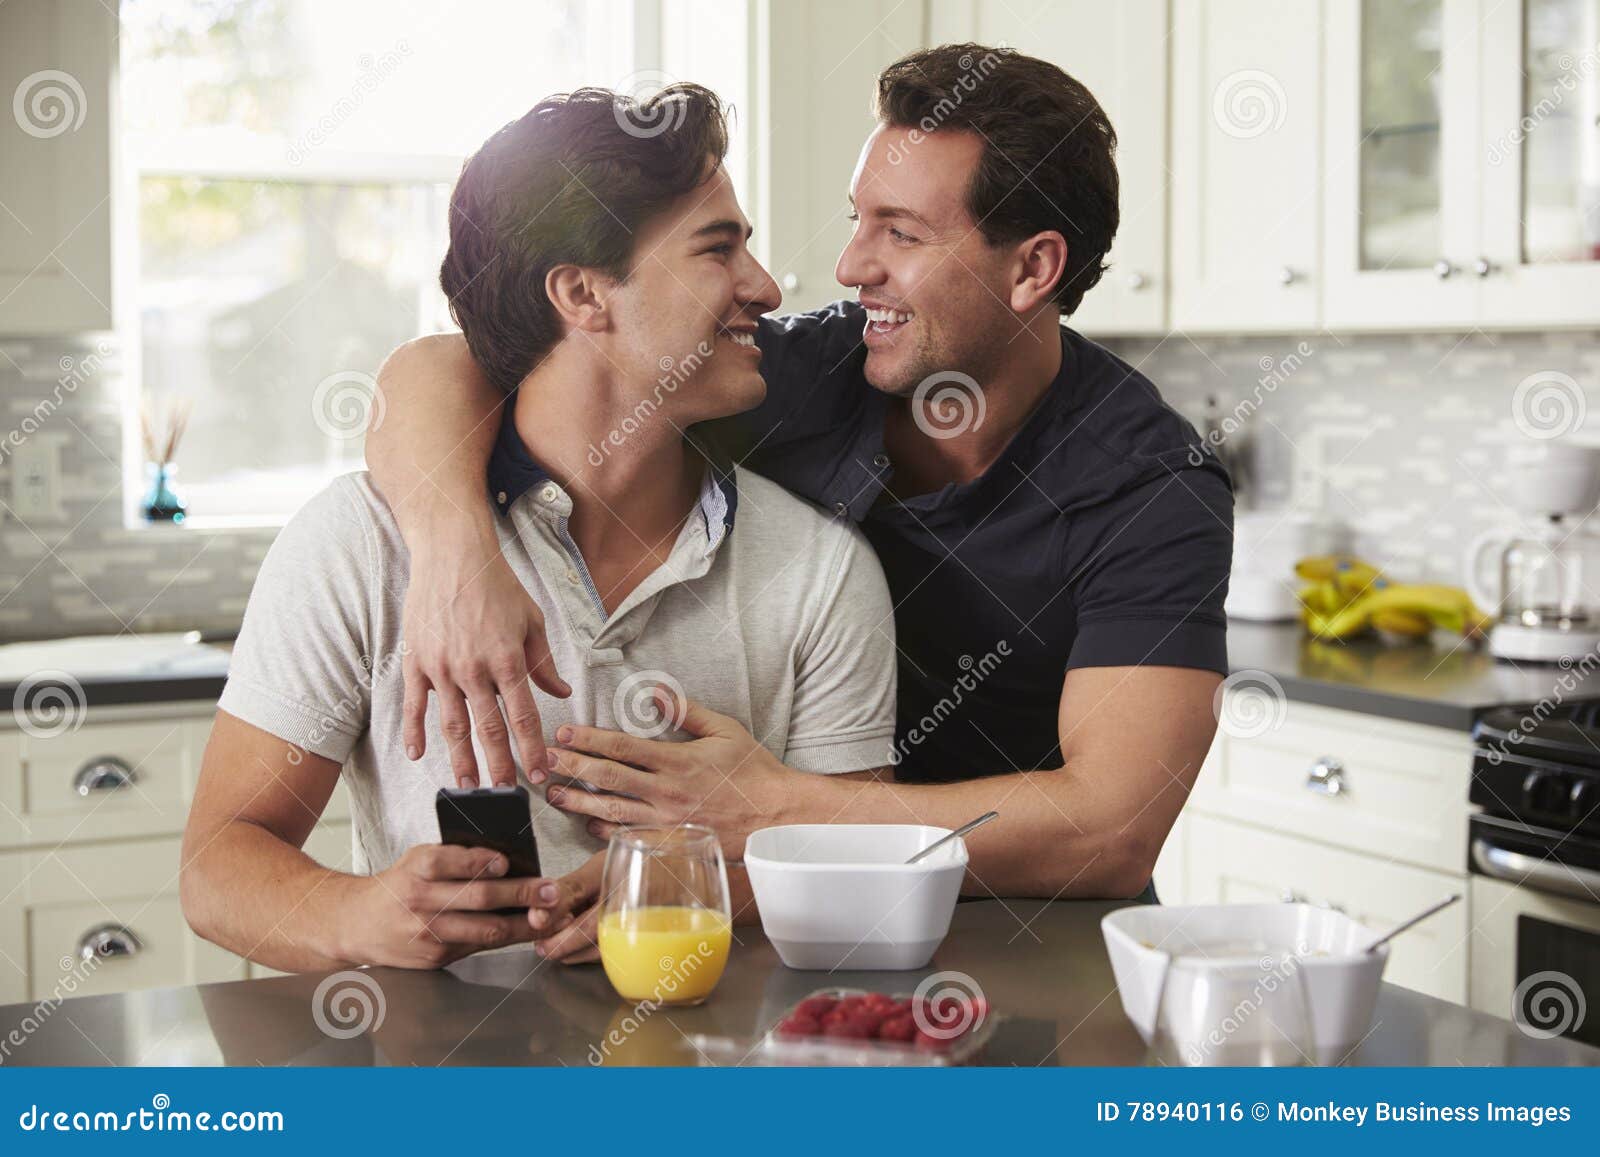 male gay couple in their 20s embracing in their kitchen